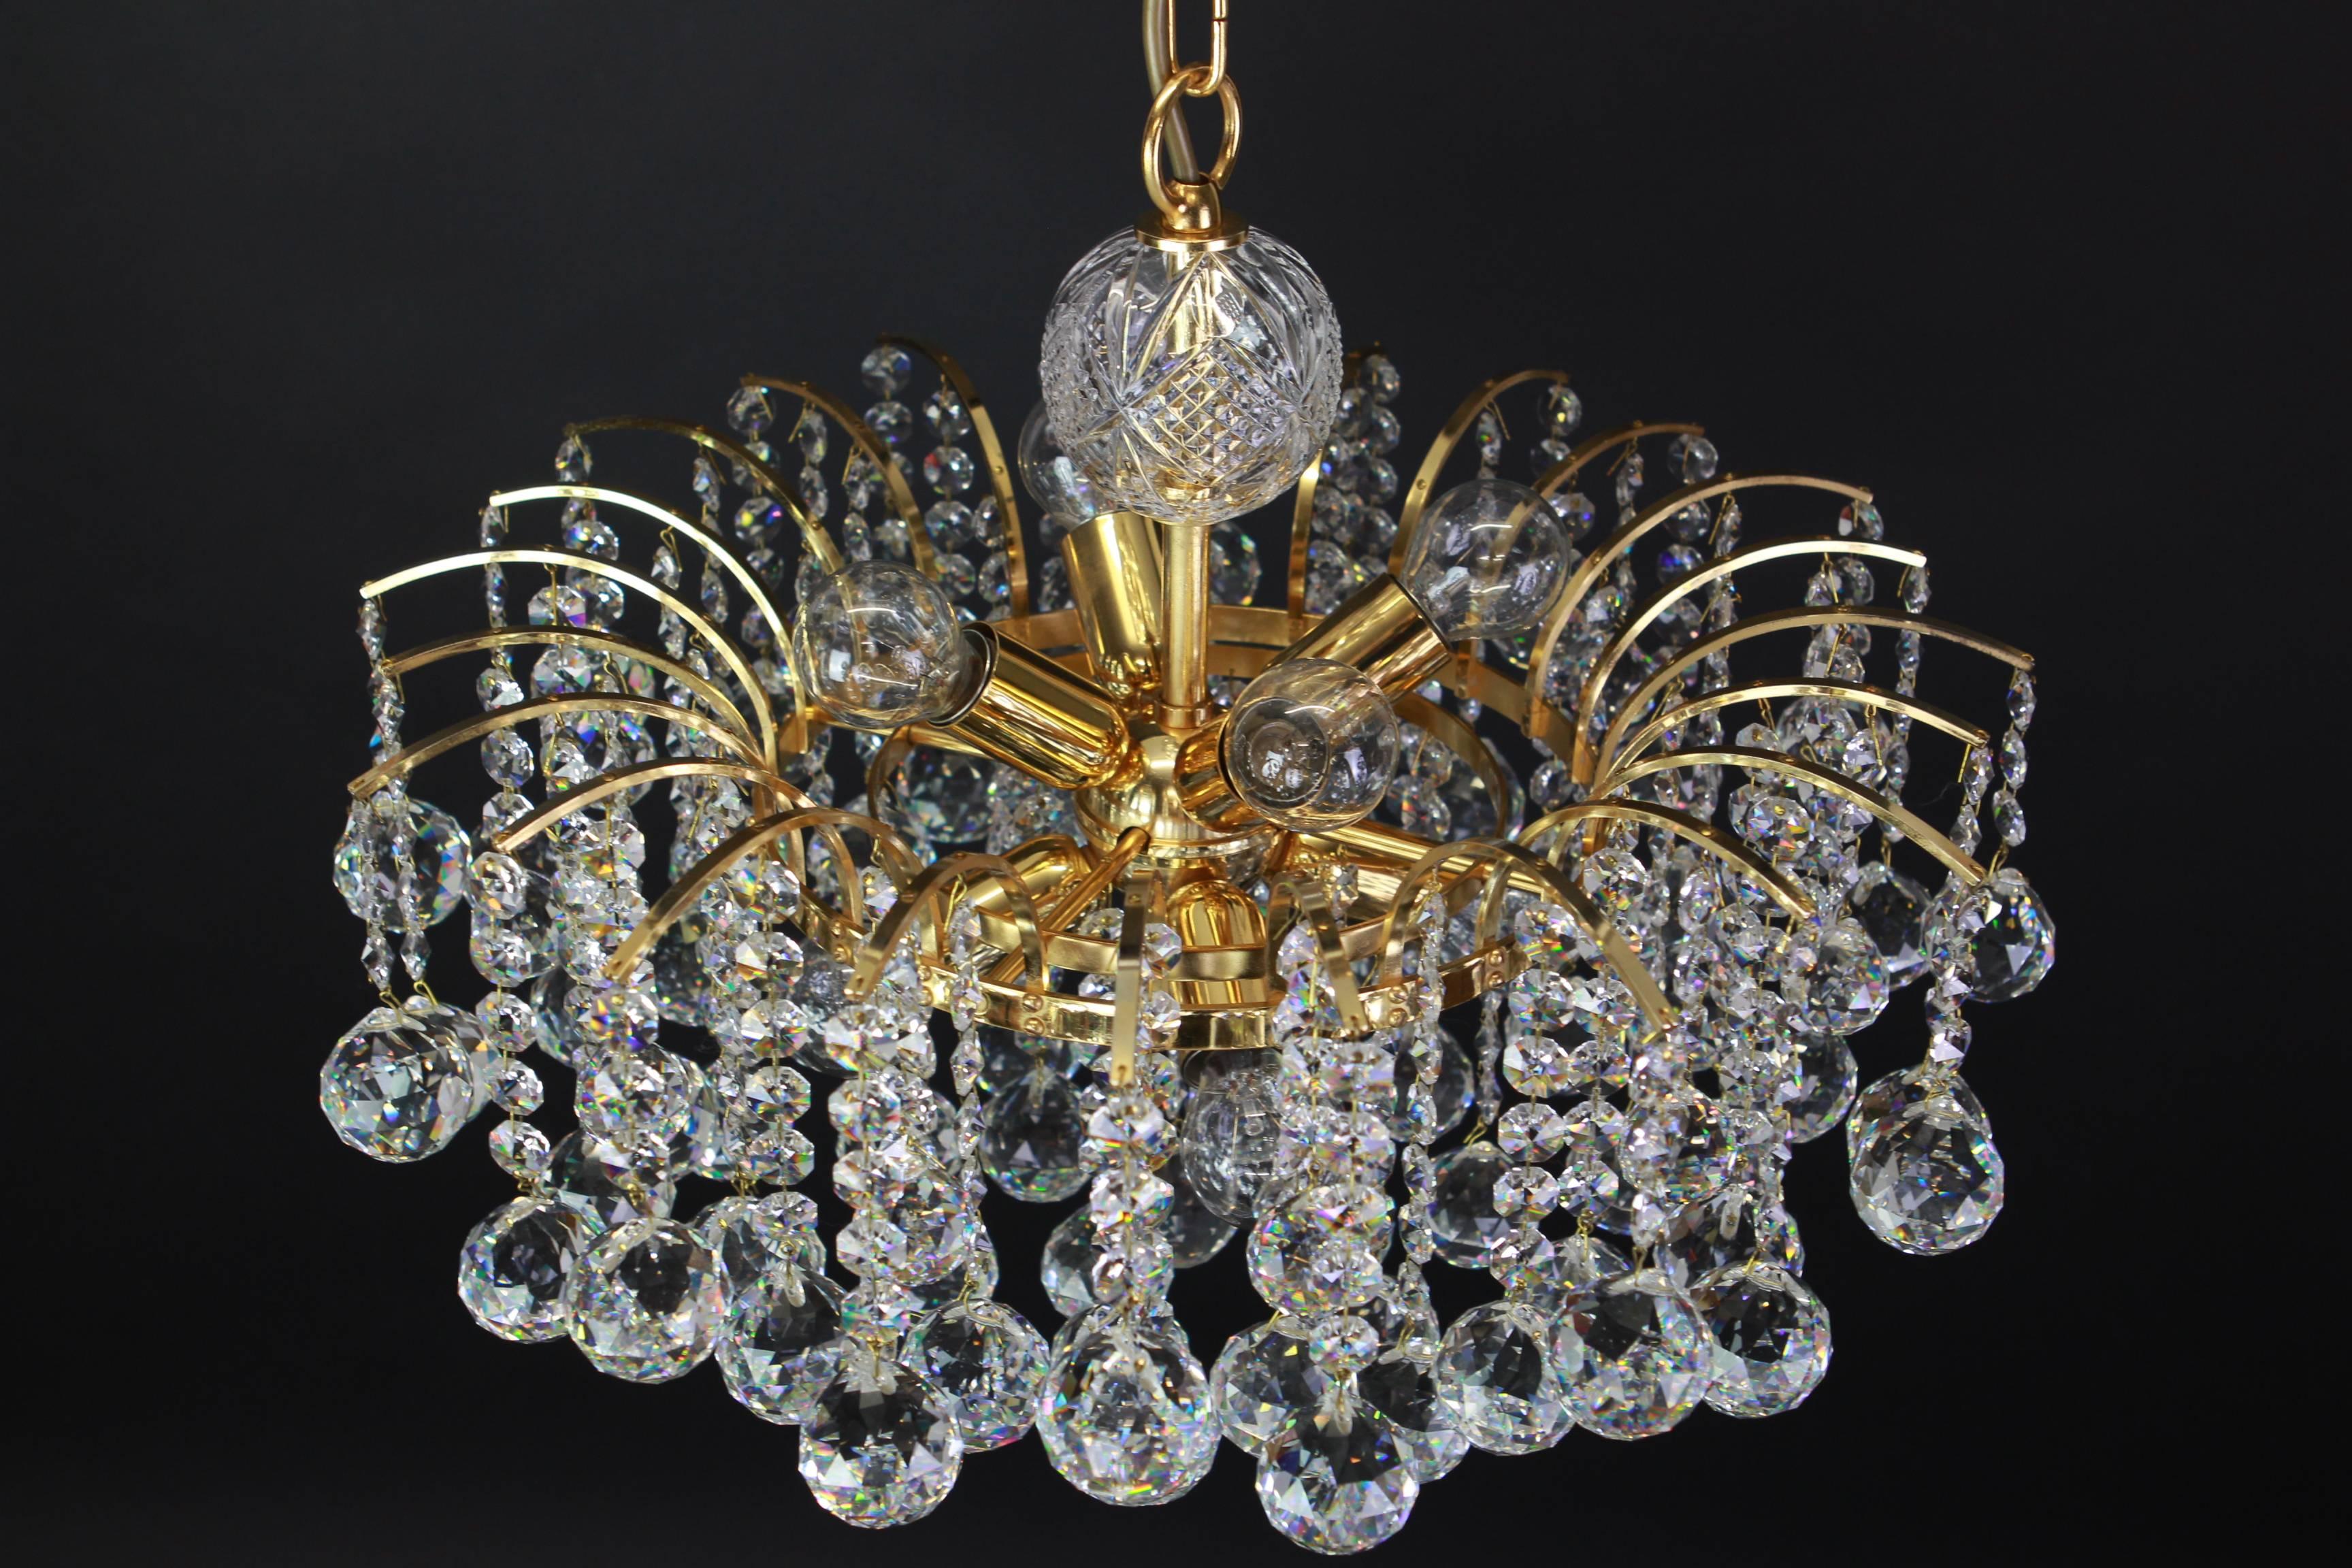 Beautiful Christoph Palme Chandelier Midcentury Crystal Balls, 1970s For Sale 2